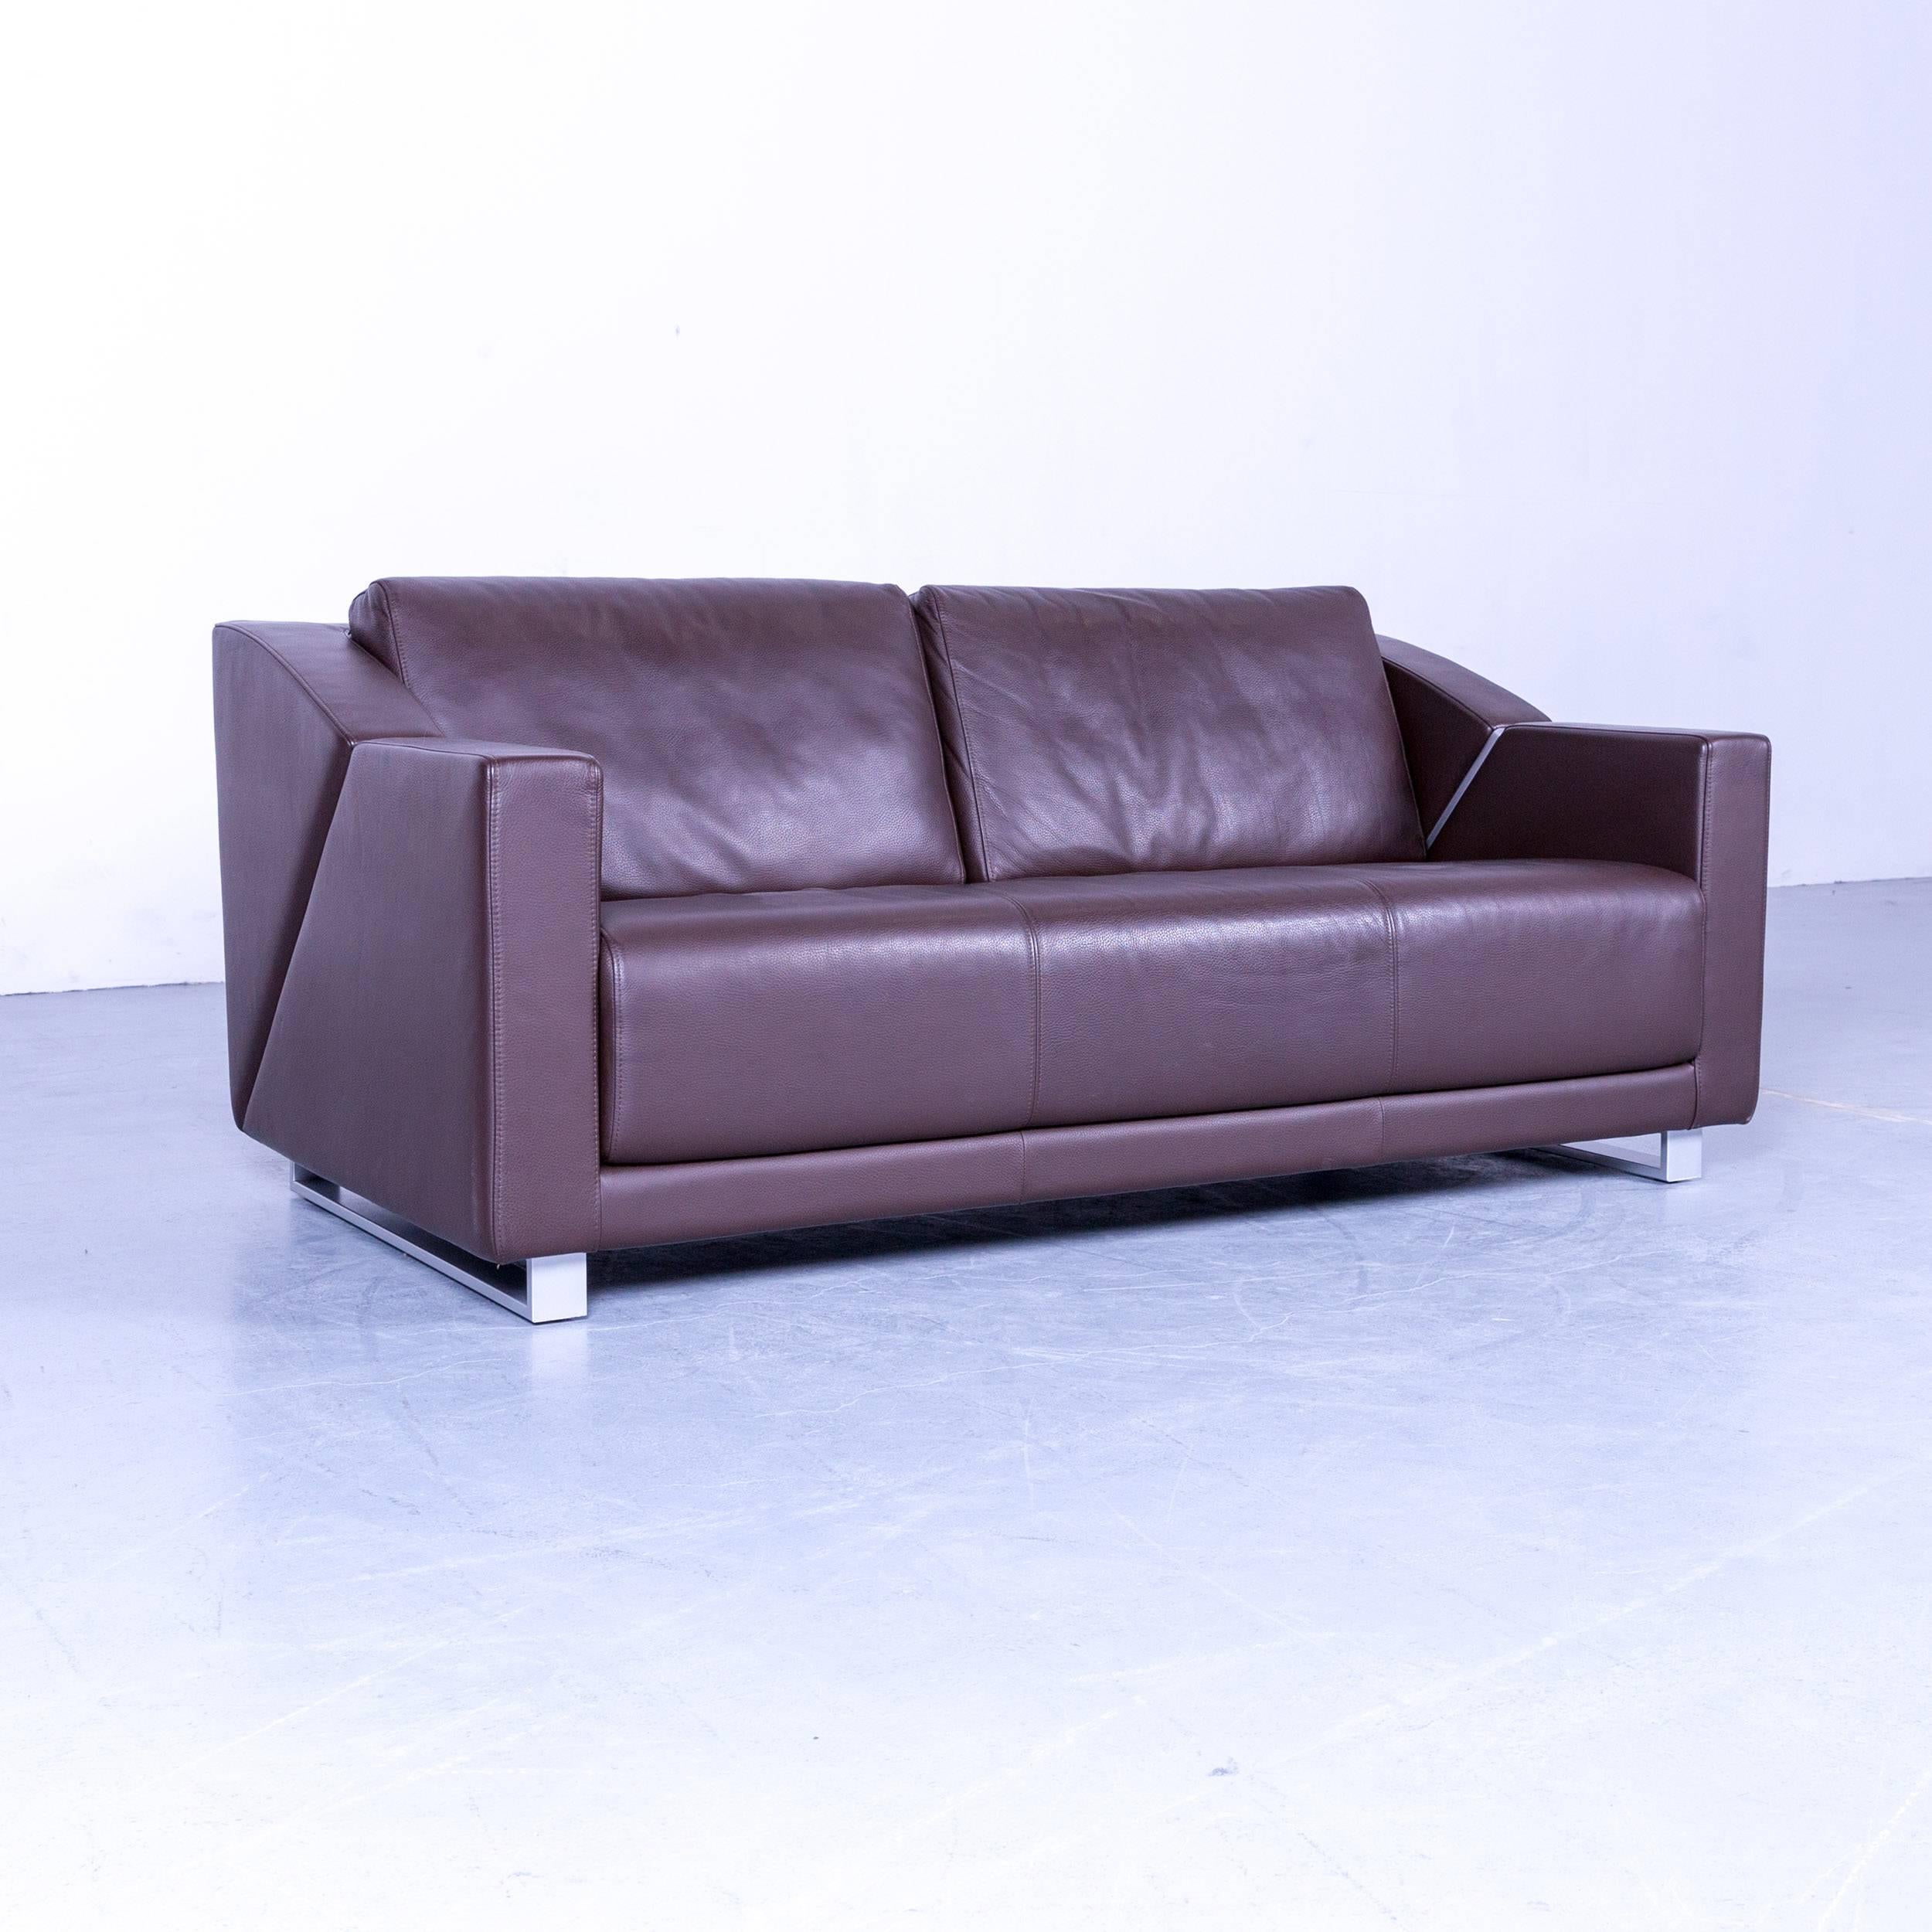 Rolf Benz 350 designer sofa brown two-seat leather made in Germany.